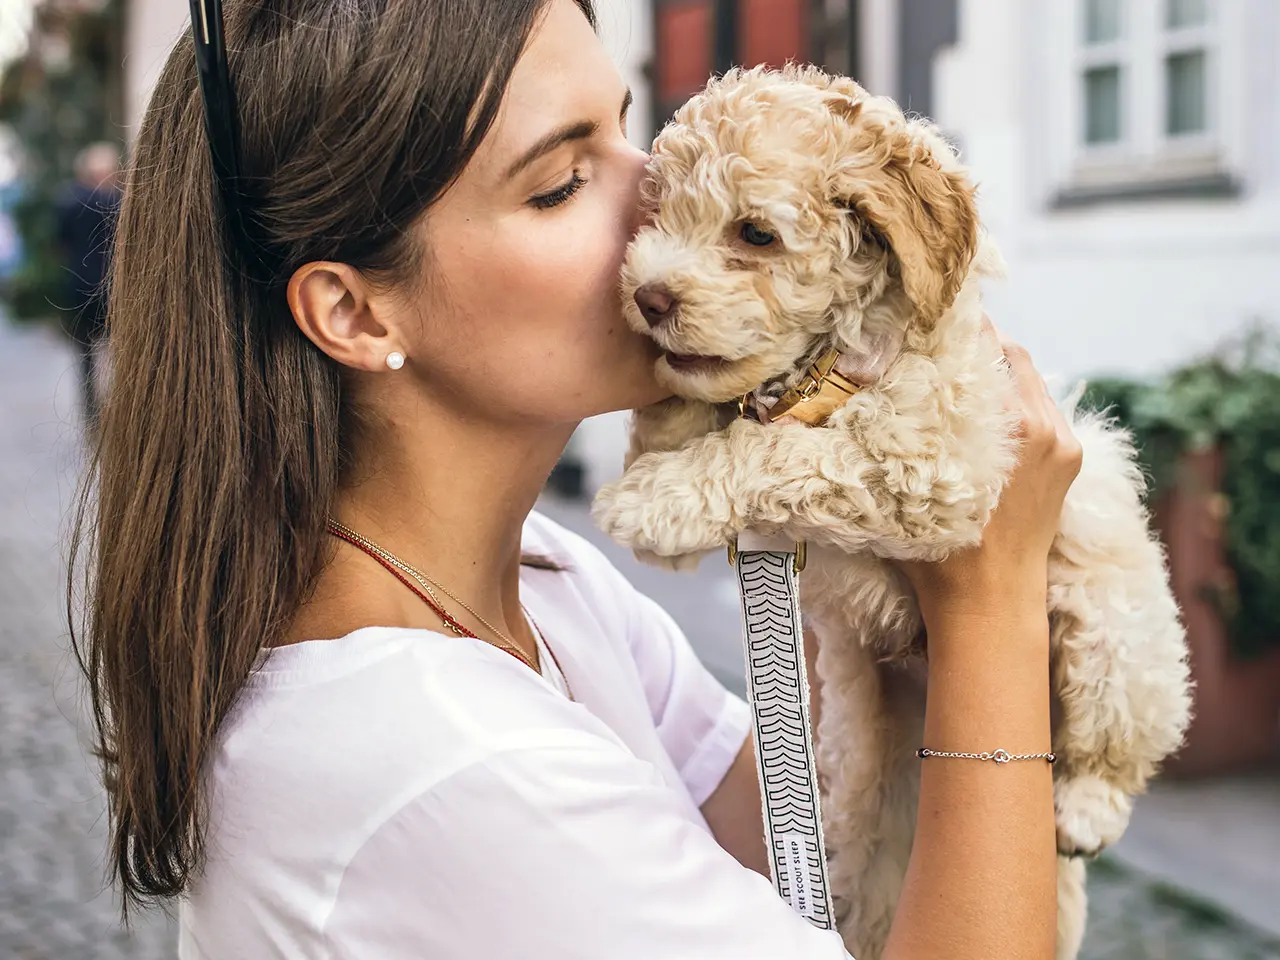 Young woman kissing a puppy